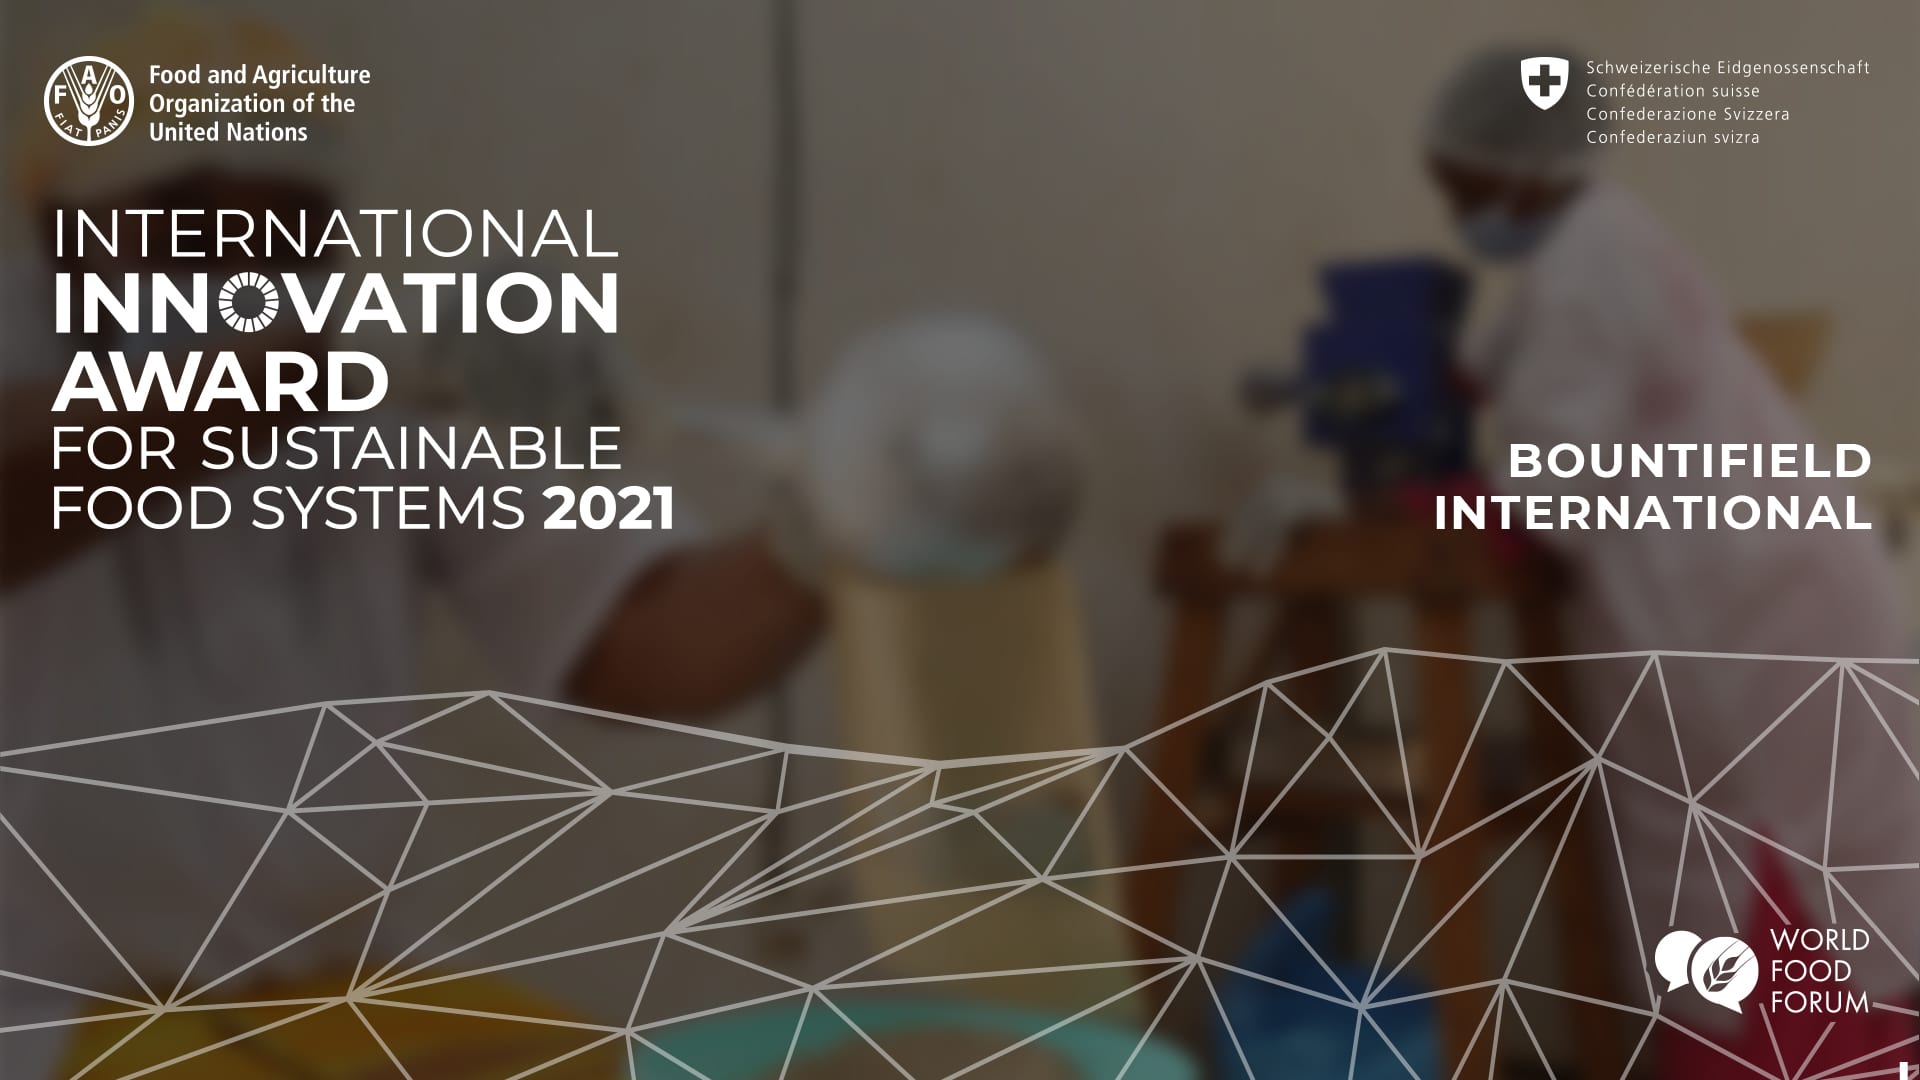 2021 International Innovation Award for Sustainable Food Systems, UN FAO & Switzerland